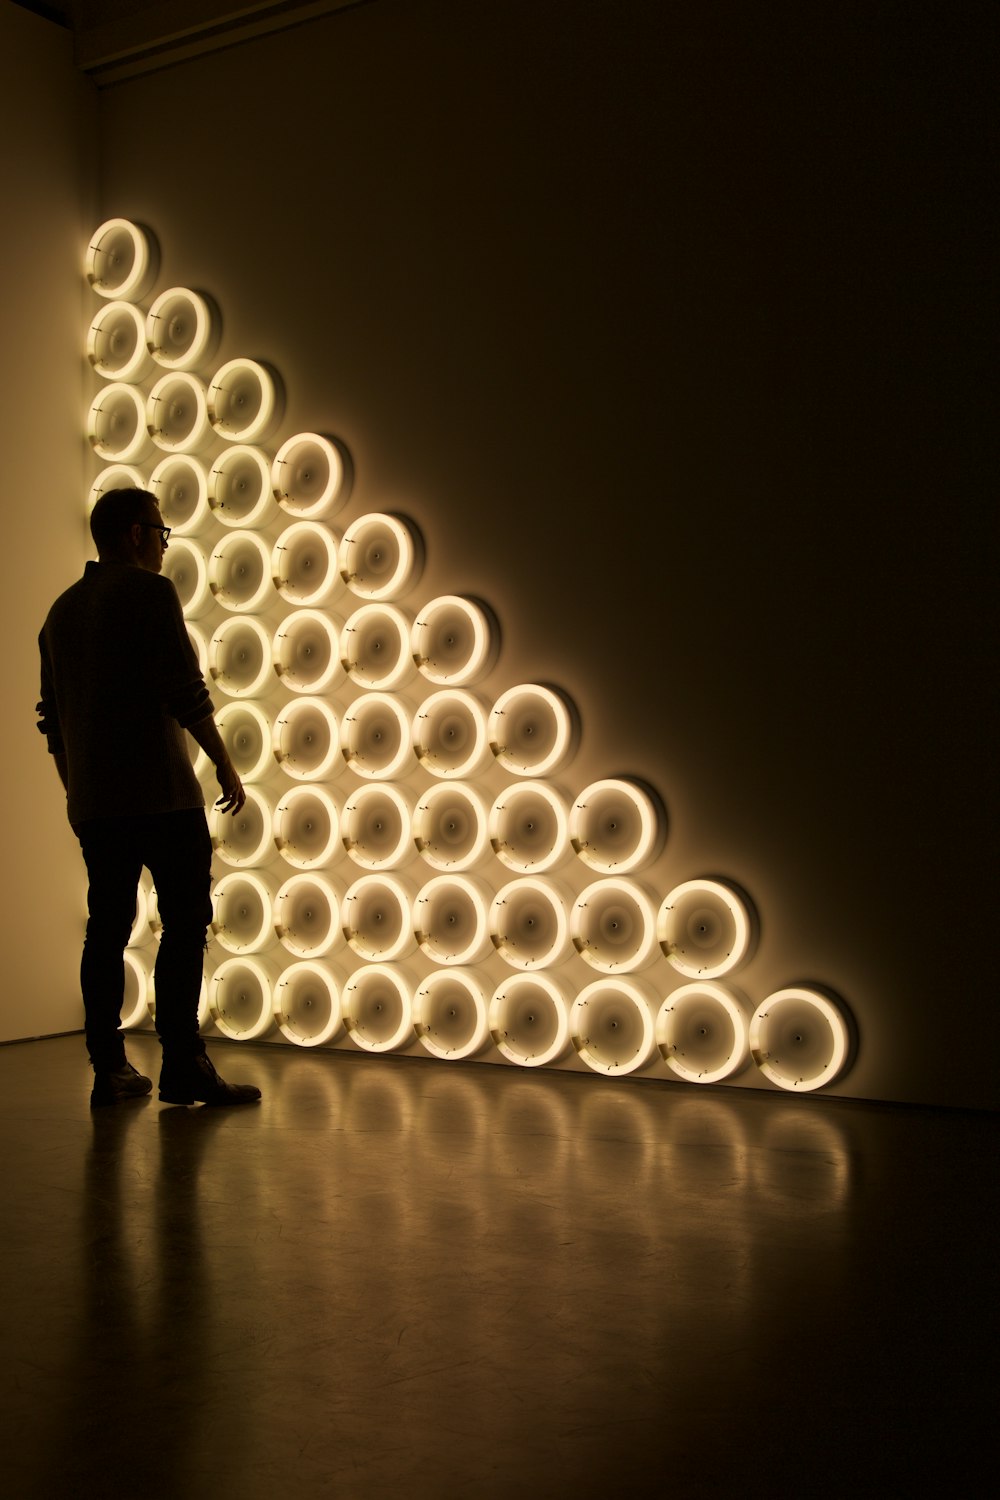 silhouette photo of man standing in front of LED wall lights \